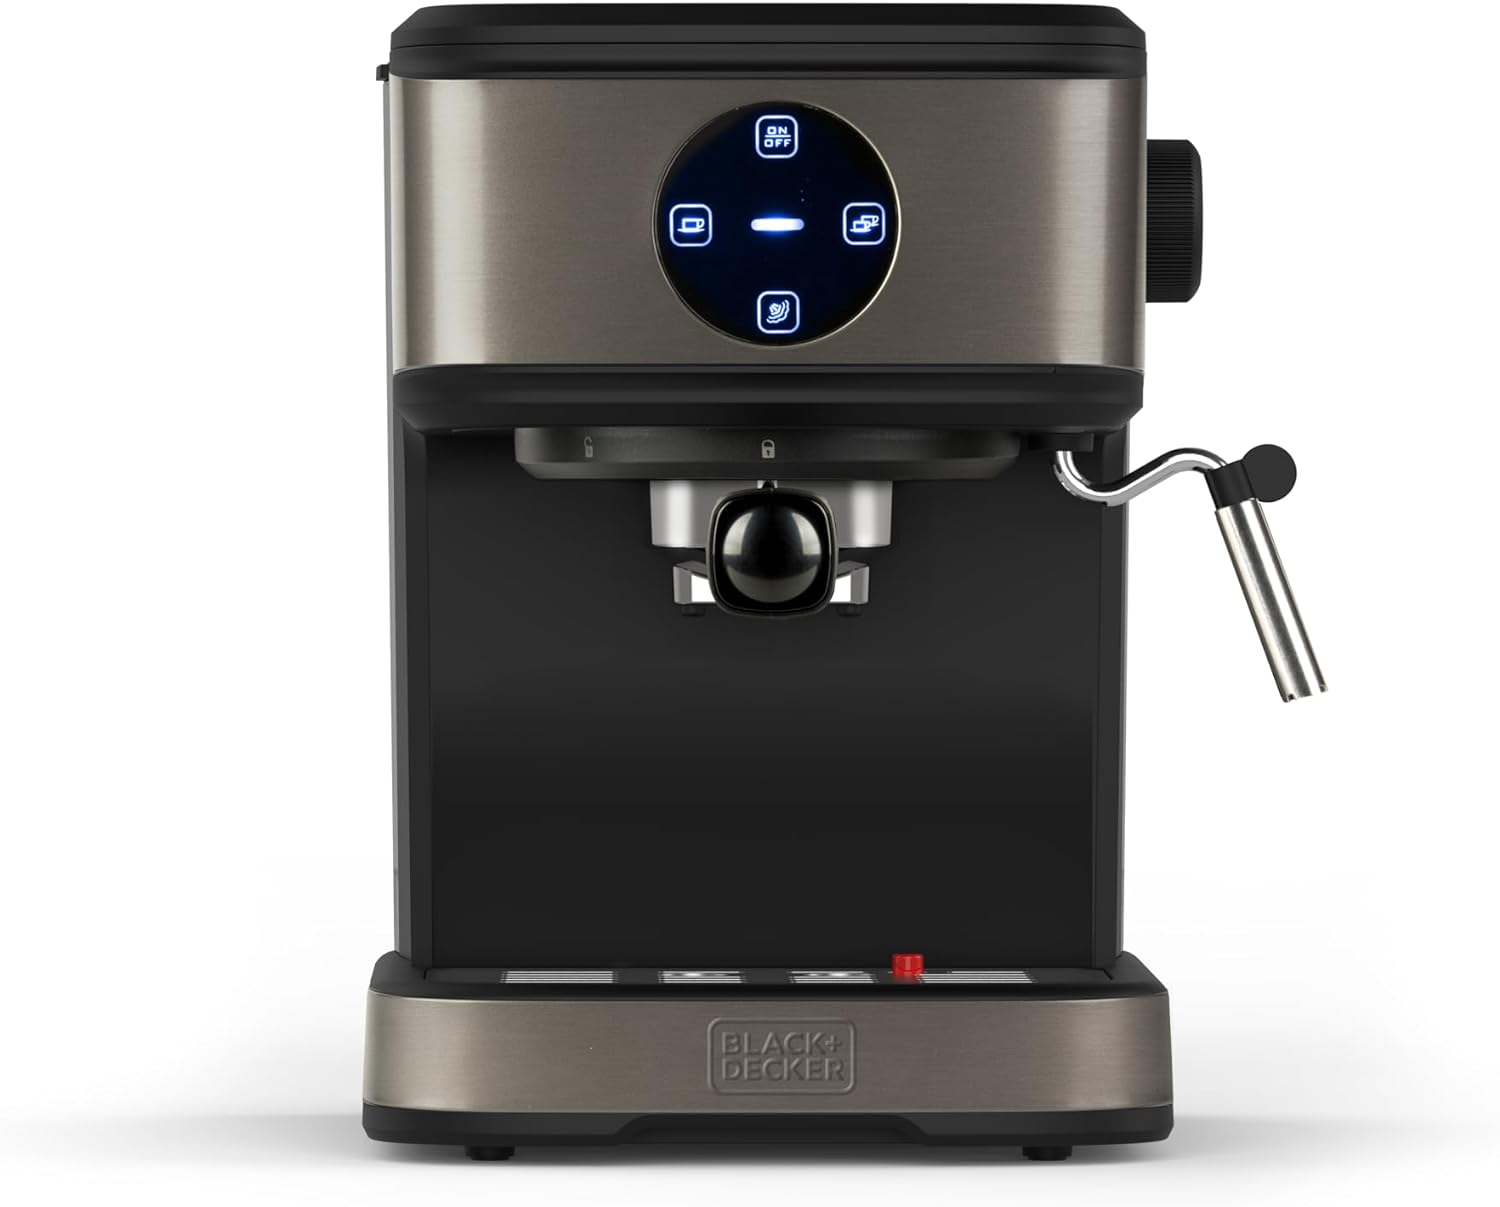 Black+Decker BXCO850E Espresso Machine, 20 bar, 1 or 2 coffee, Steam Function, Auto Stop, Programmable Quantity, Extra Cream System, 1.5 L, Anti-Fingerprint Stainless Steel Surface, 850 W